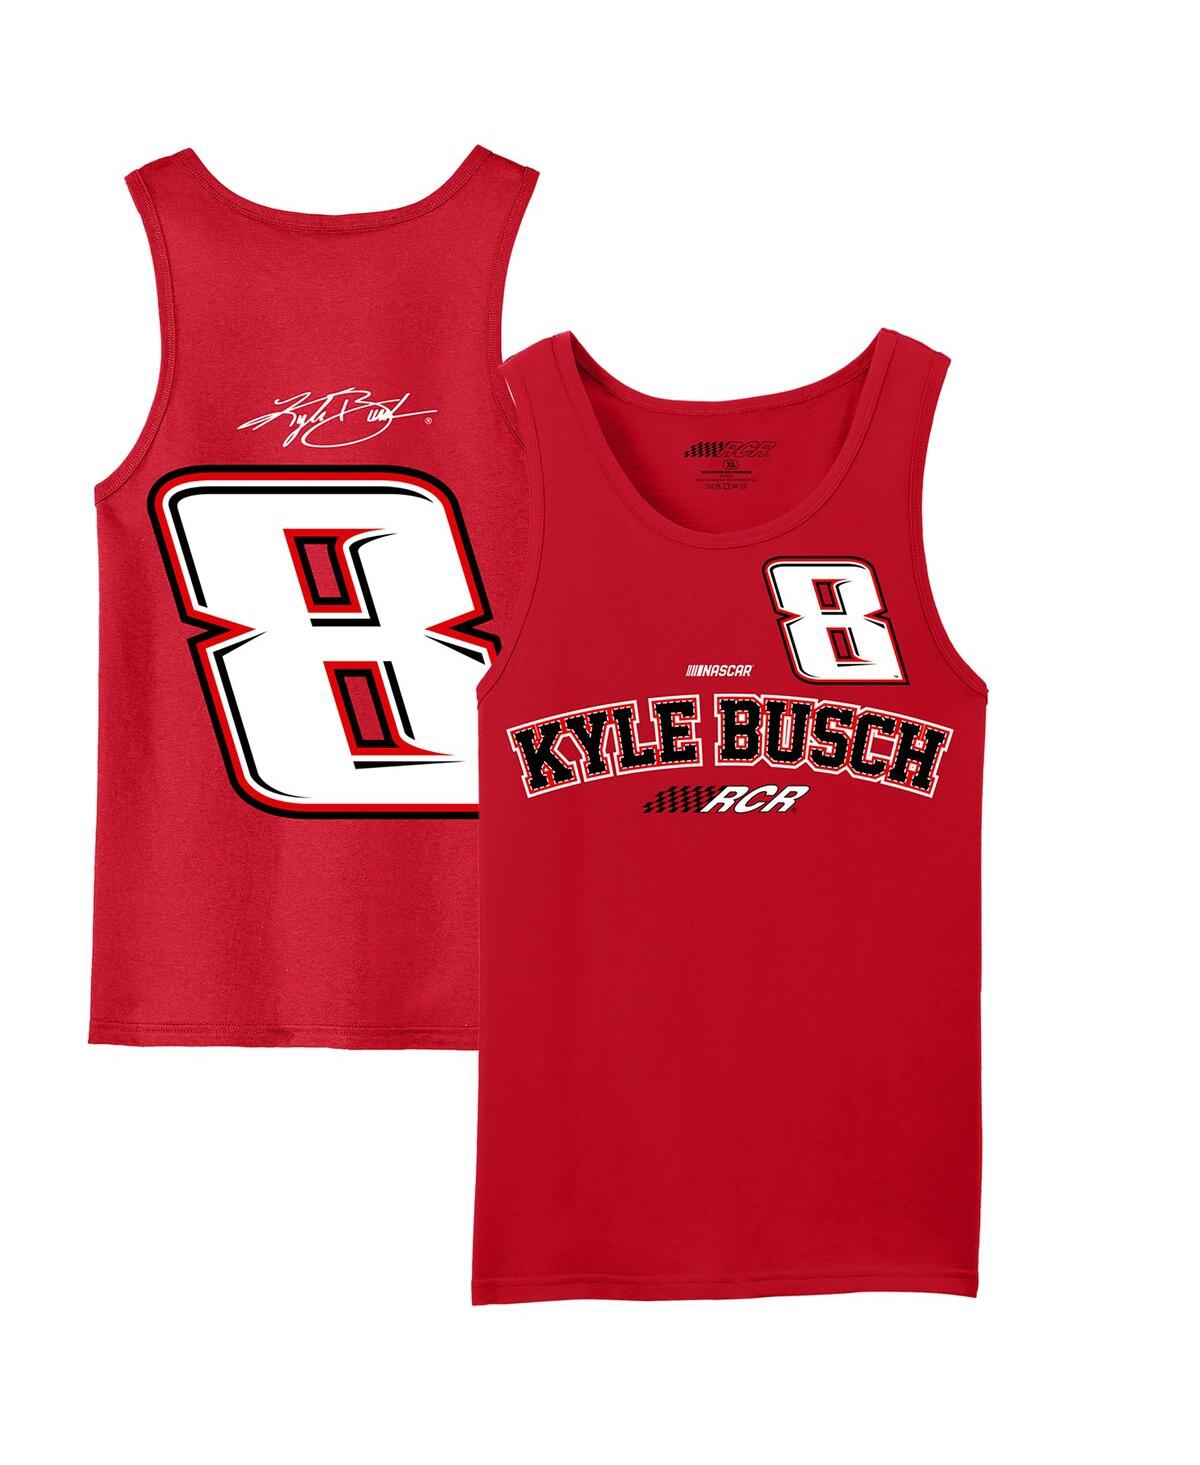 Men's Richard Childress Racing Team Collection Red Kyle Busch Tank Top - Red